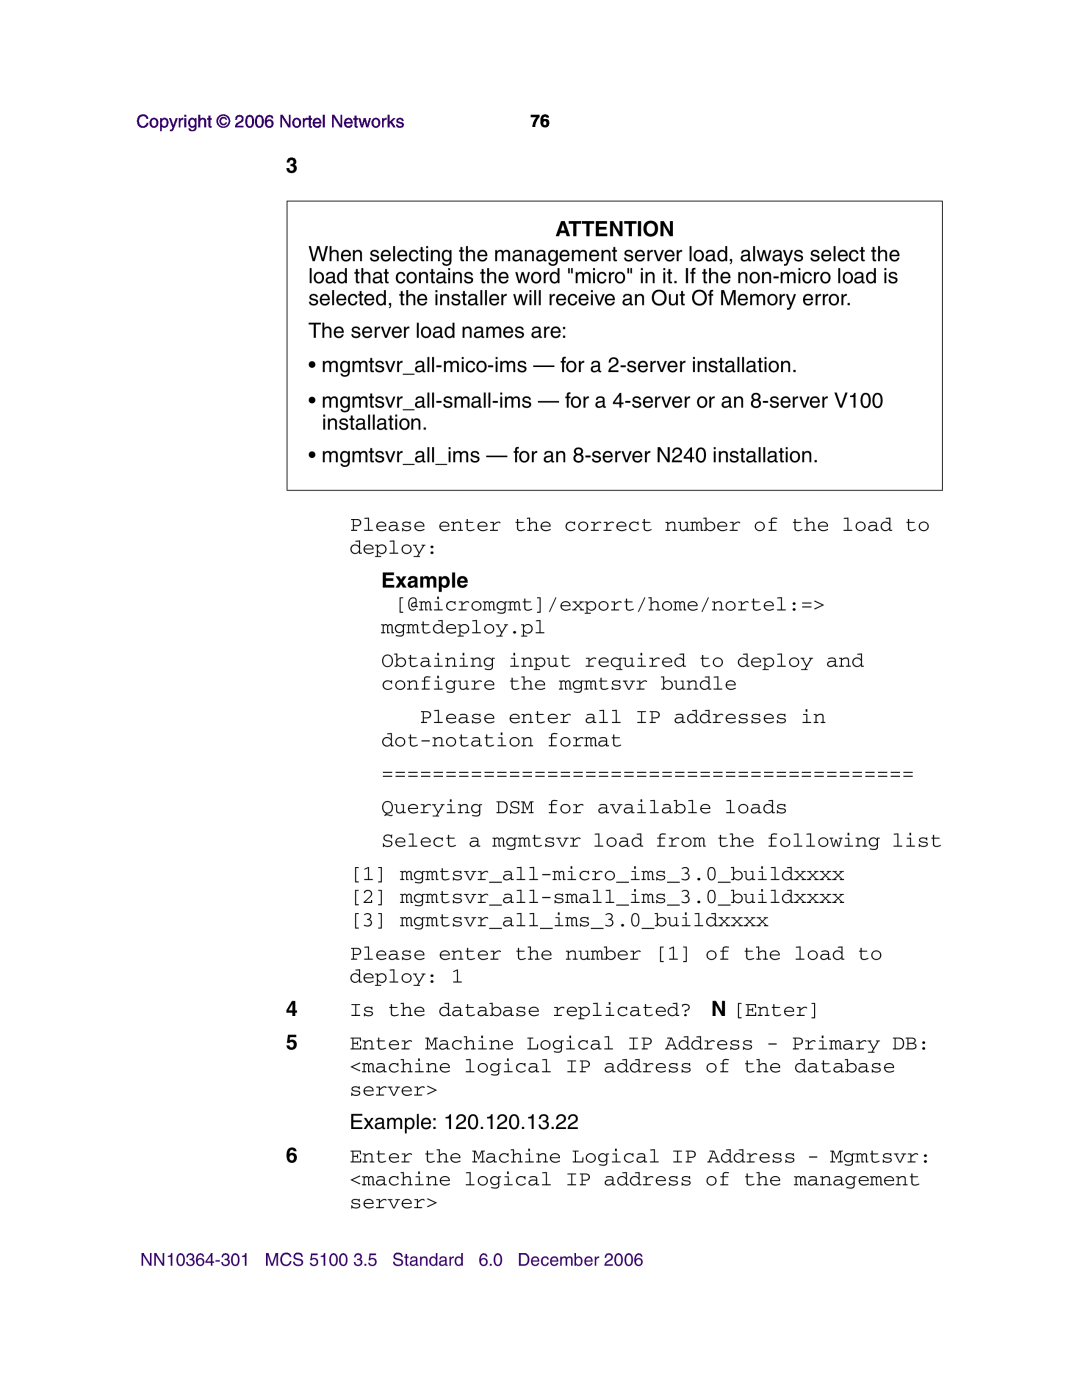 Nortel Networks V100 manual Example @micromgmt/export/home/nortel= mgmtdeploy.pl 